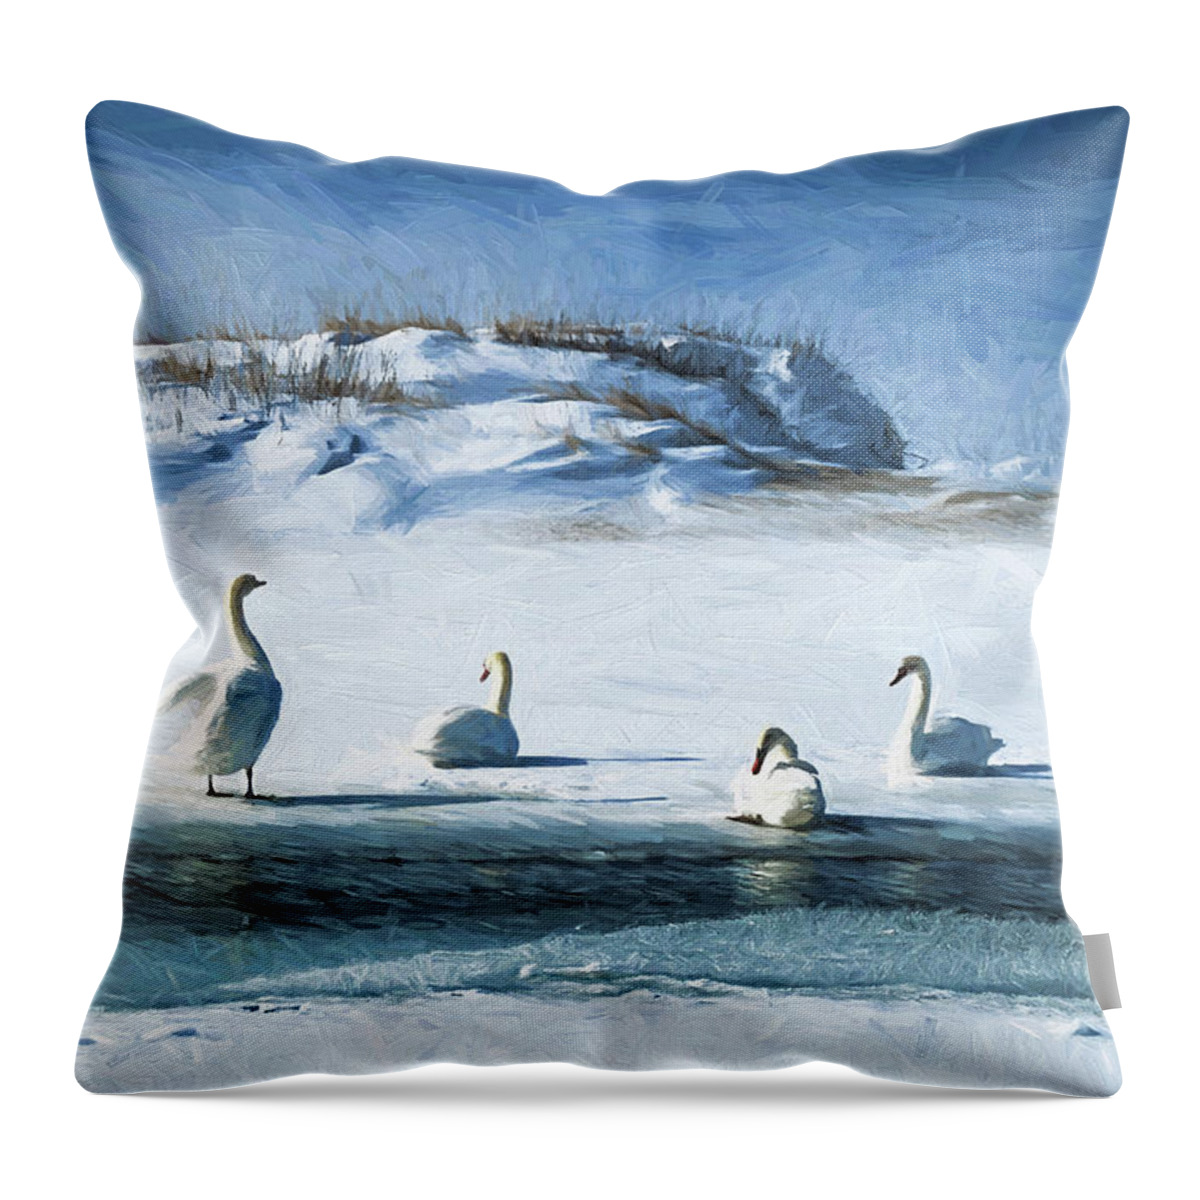 Use Throw Pillow featuring the photograph Lake Michigan Swans by Dennis Cox